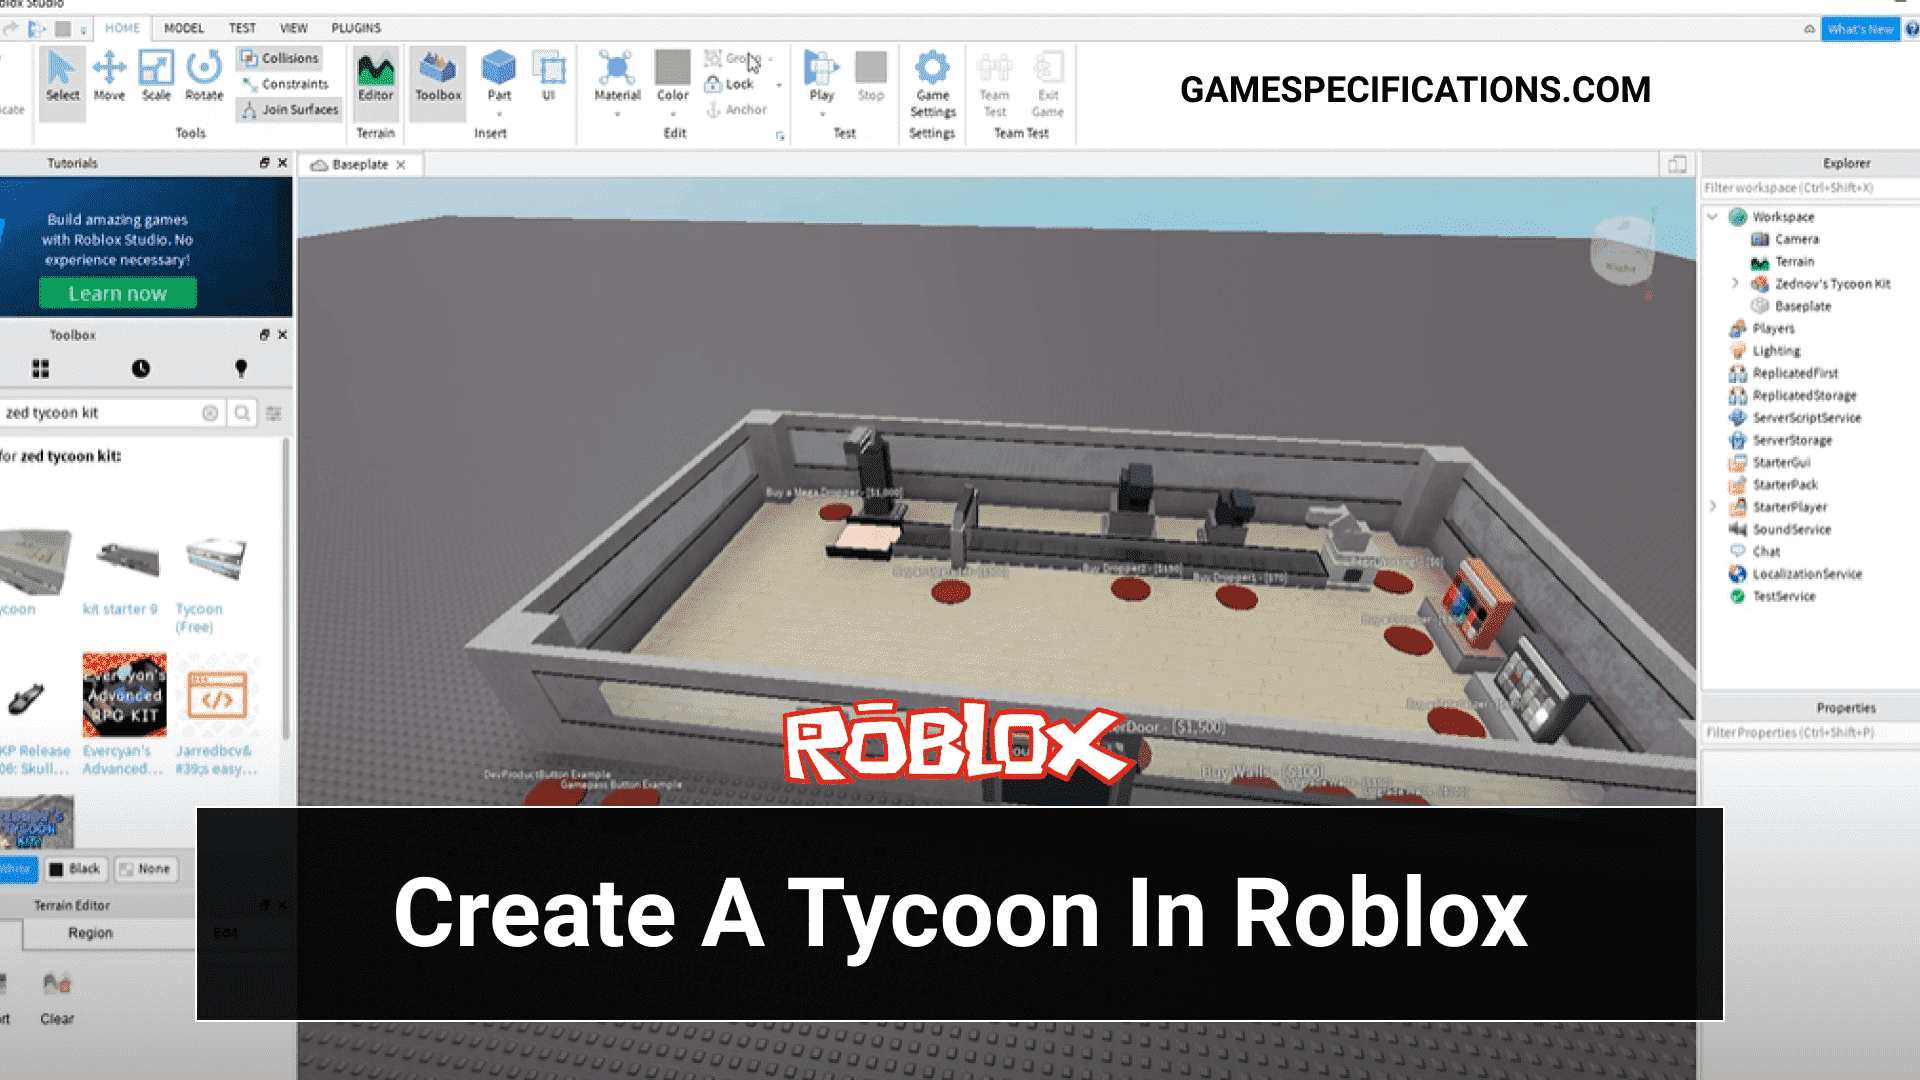 A Complete Guide On How To Make A Tycoon On Roblox Game Specifications - empire tycoon roblox